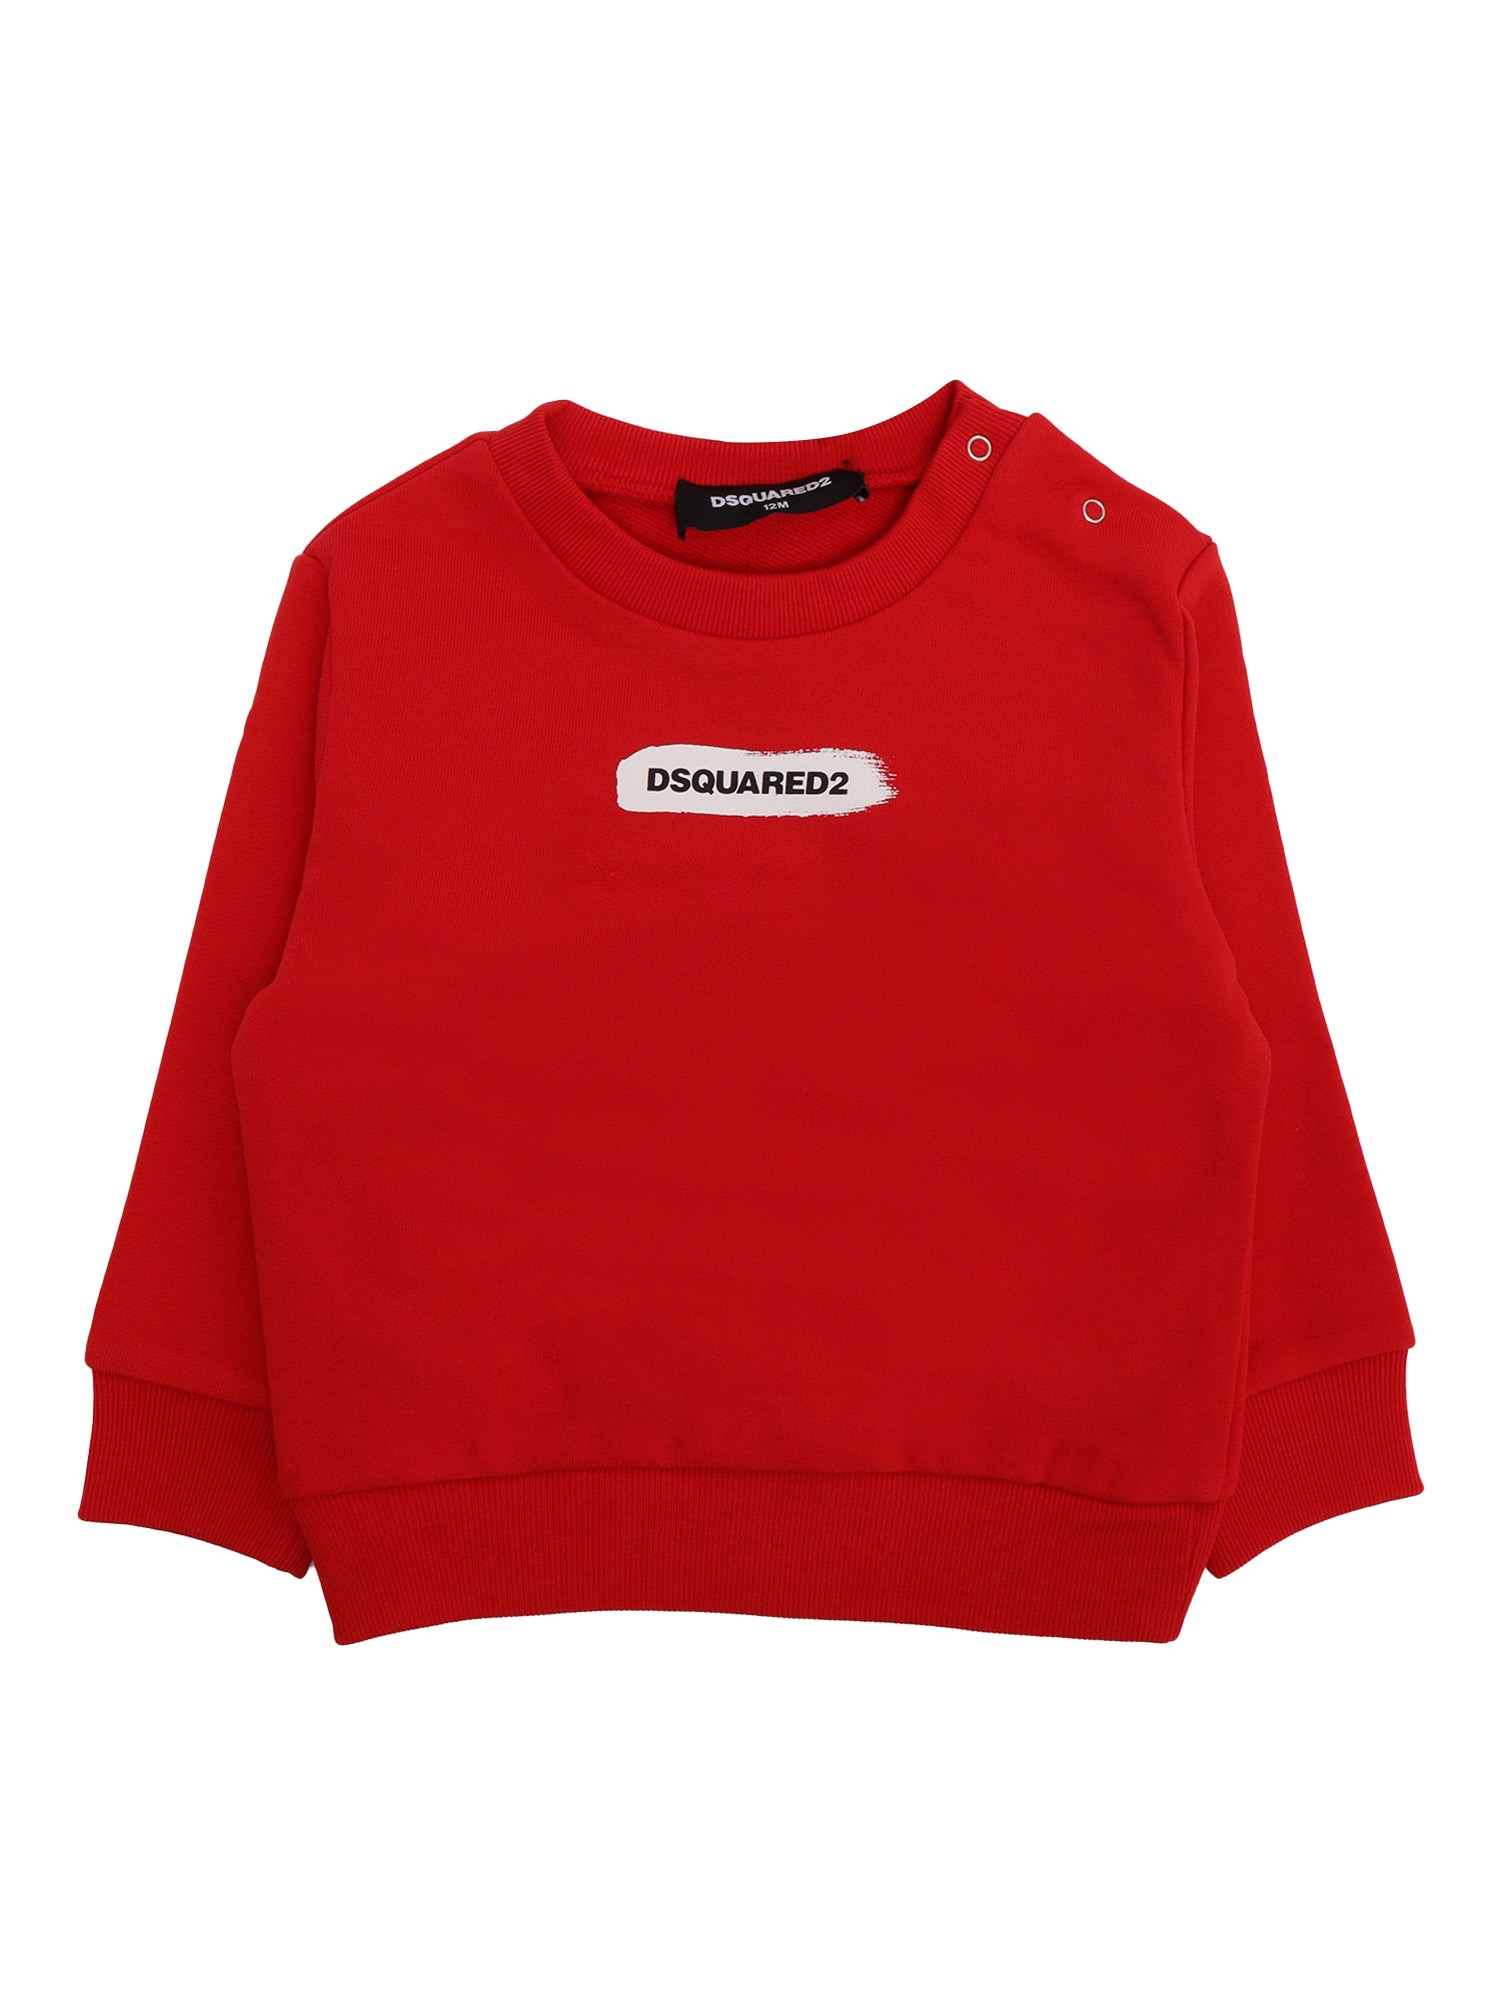 Shop D-squared2 Sweatshirt For Children In Red